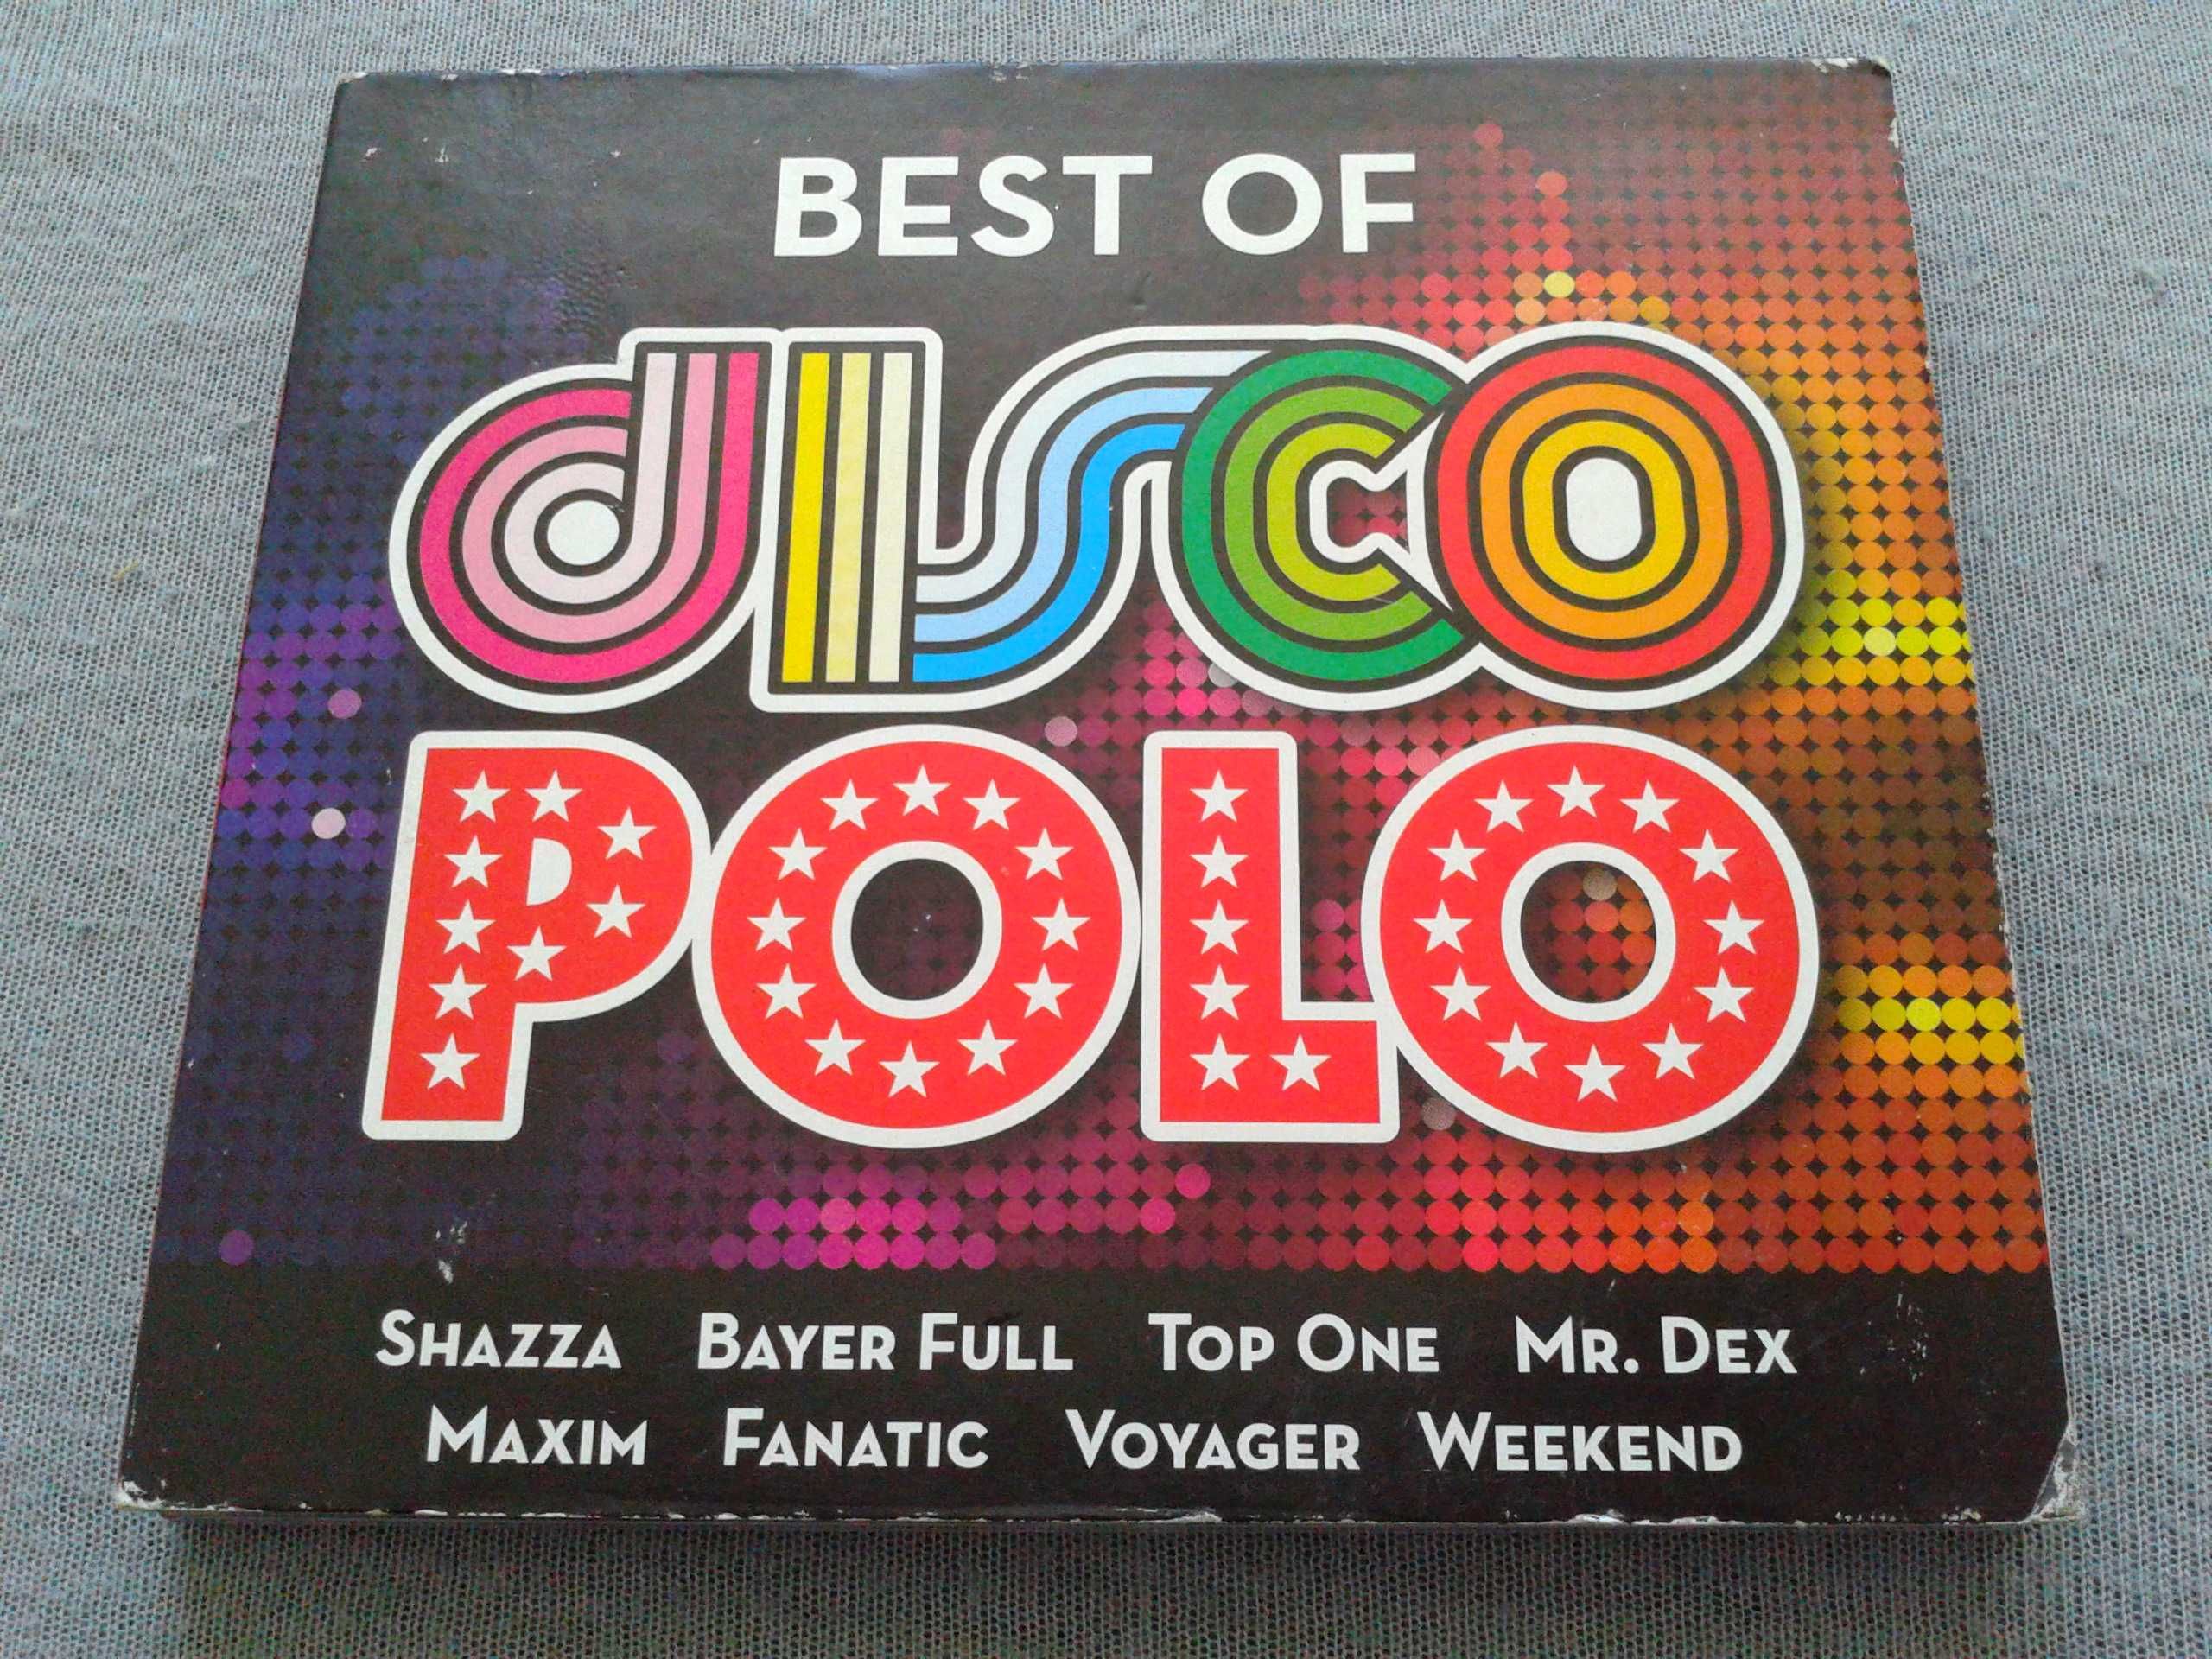 Best Of Disco Polo  2 CD